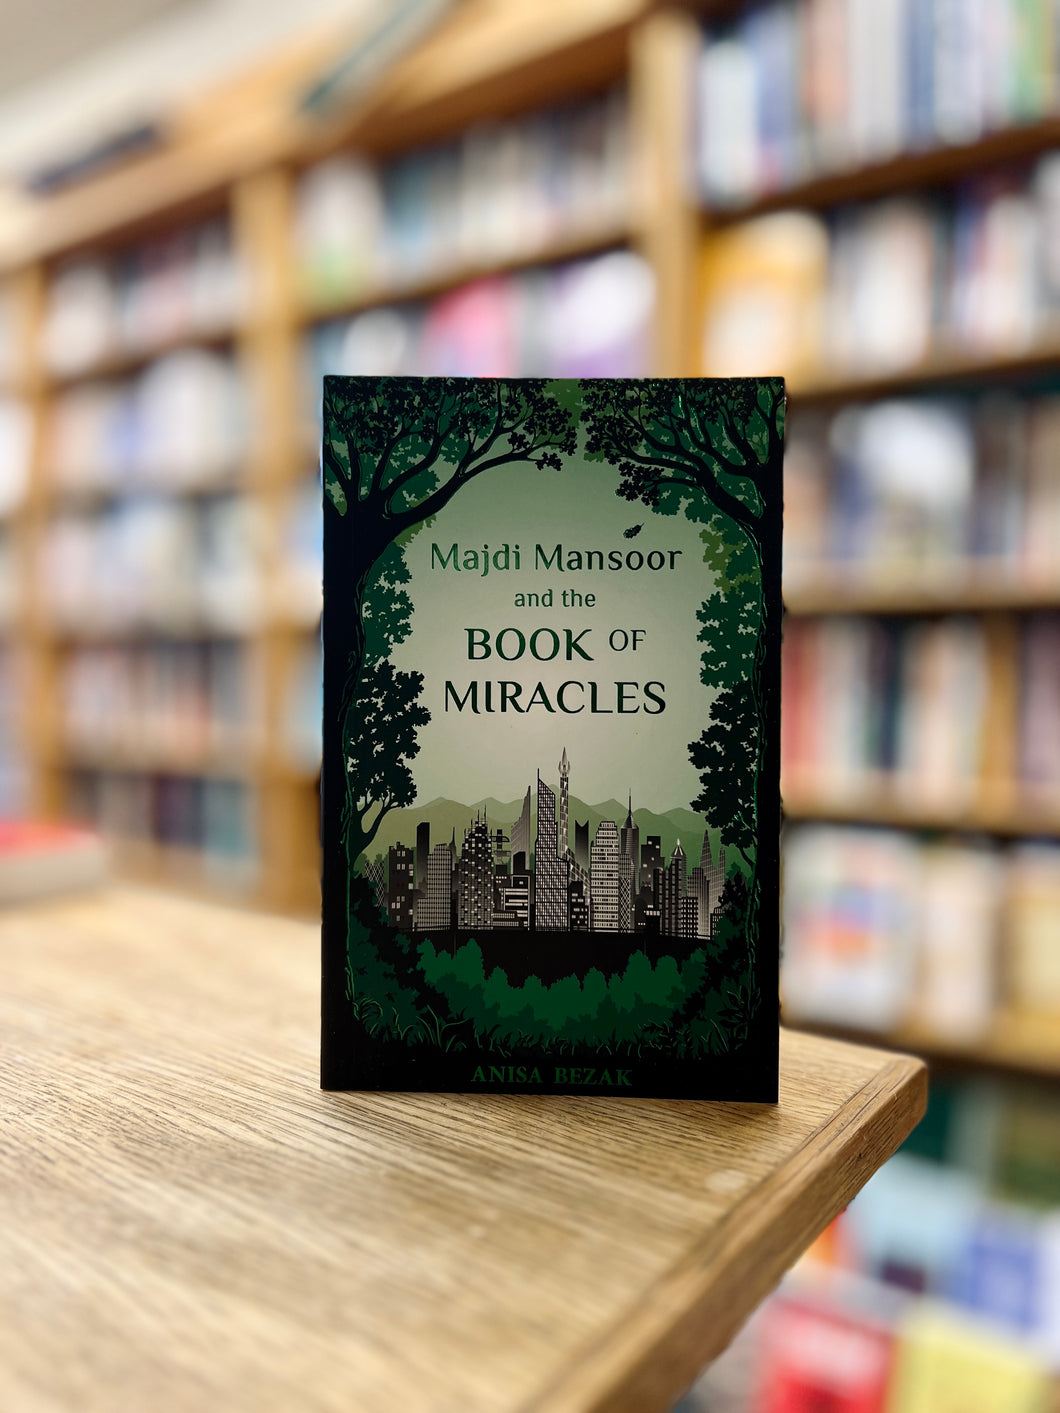 MAJDI MANSOOR AND THE BOOK OF MIRACLES